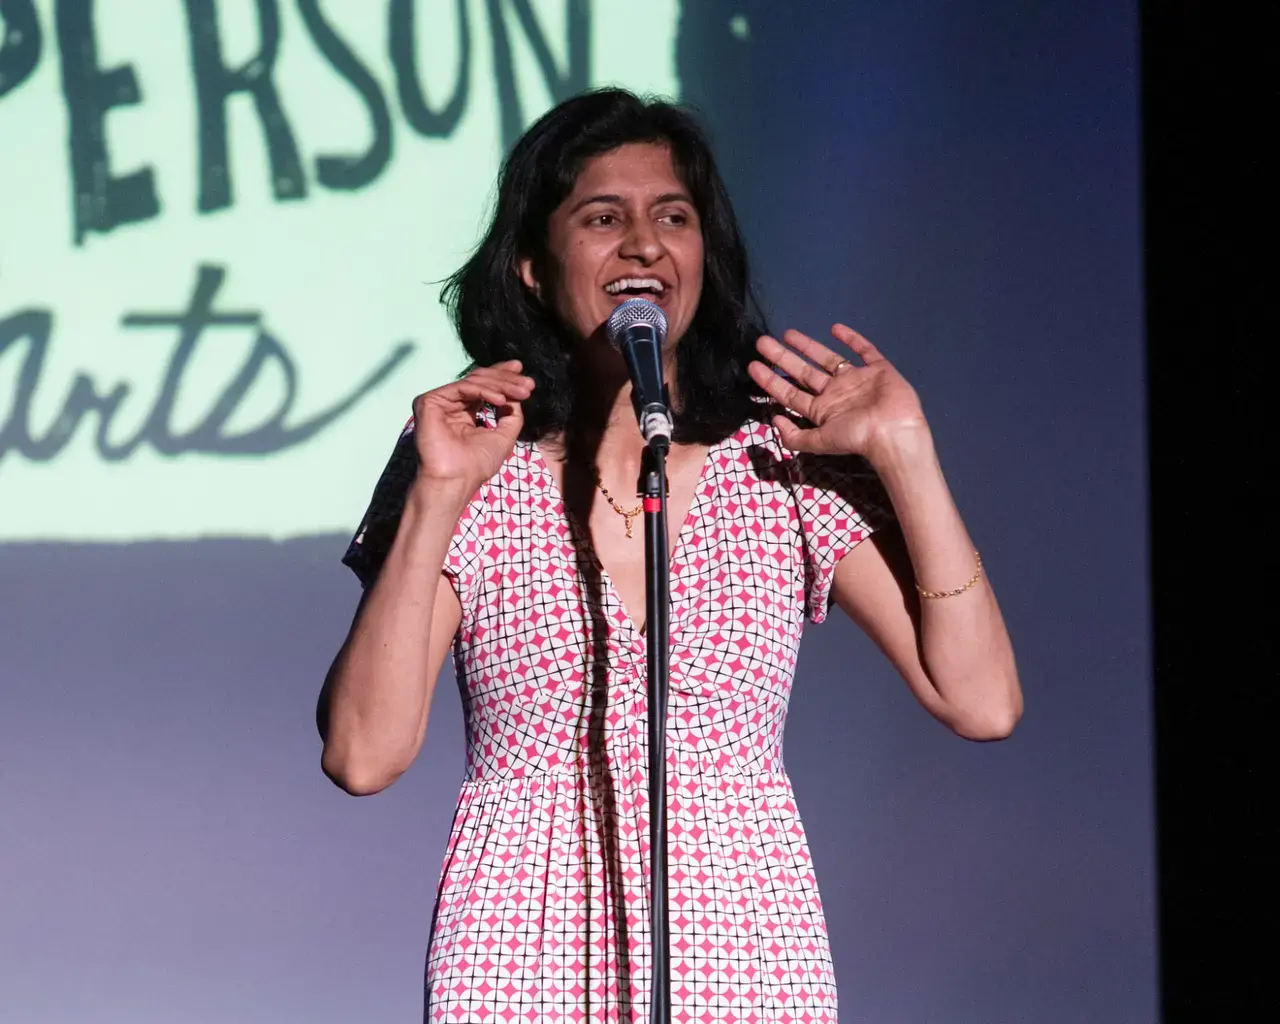 StorySlam winner Nimisha Ladva competes for the title of &quot;Best Storyteller in Philadelphia&quot; at the Season 10 Grand Slam. Photo by Jen Cleary.